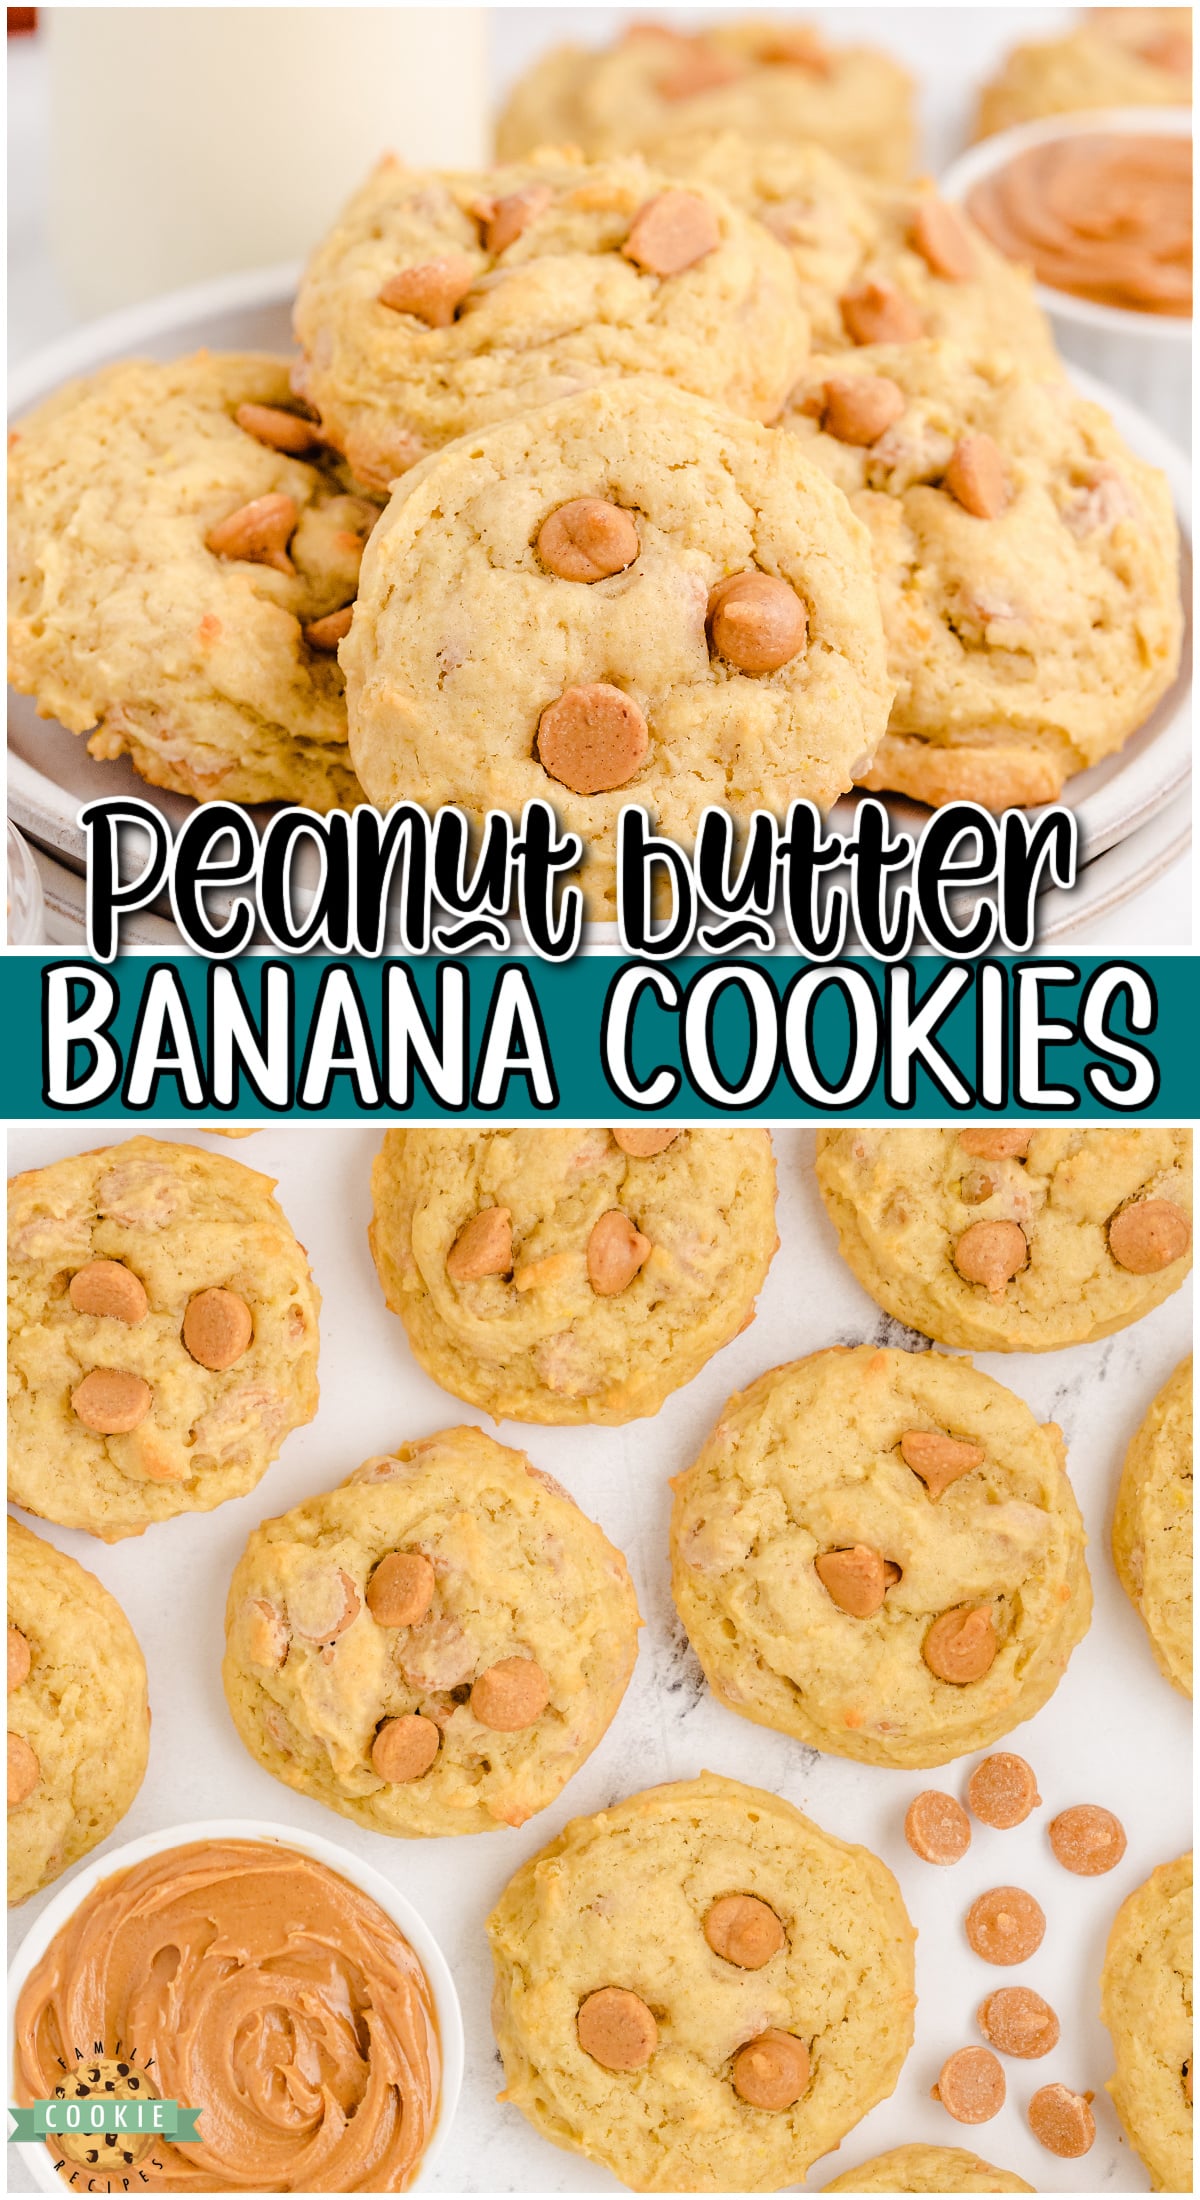 Peanut Butter Banana Cookies are a classic banana cookie recipe with a twist! Soft, chewy cookies from adding banana + pudding mix! 